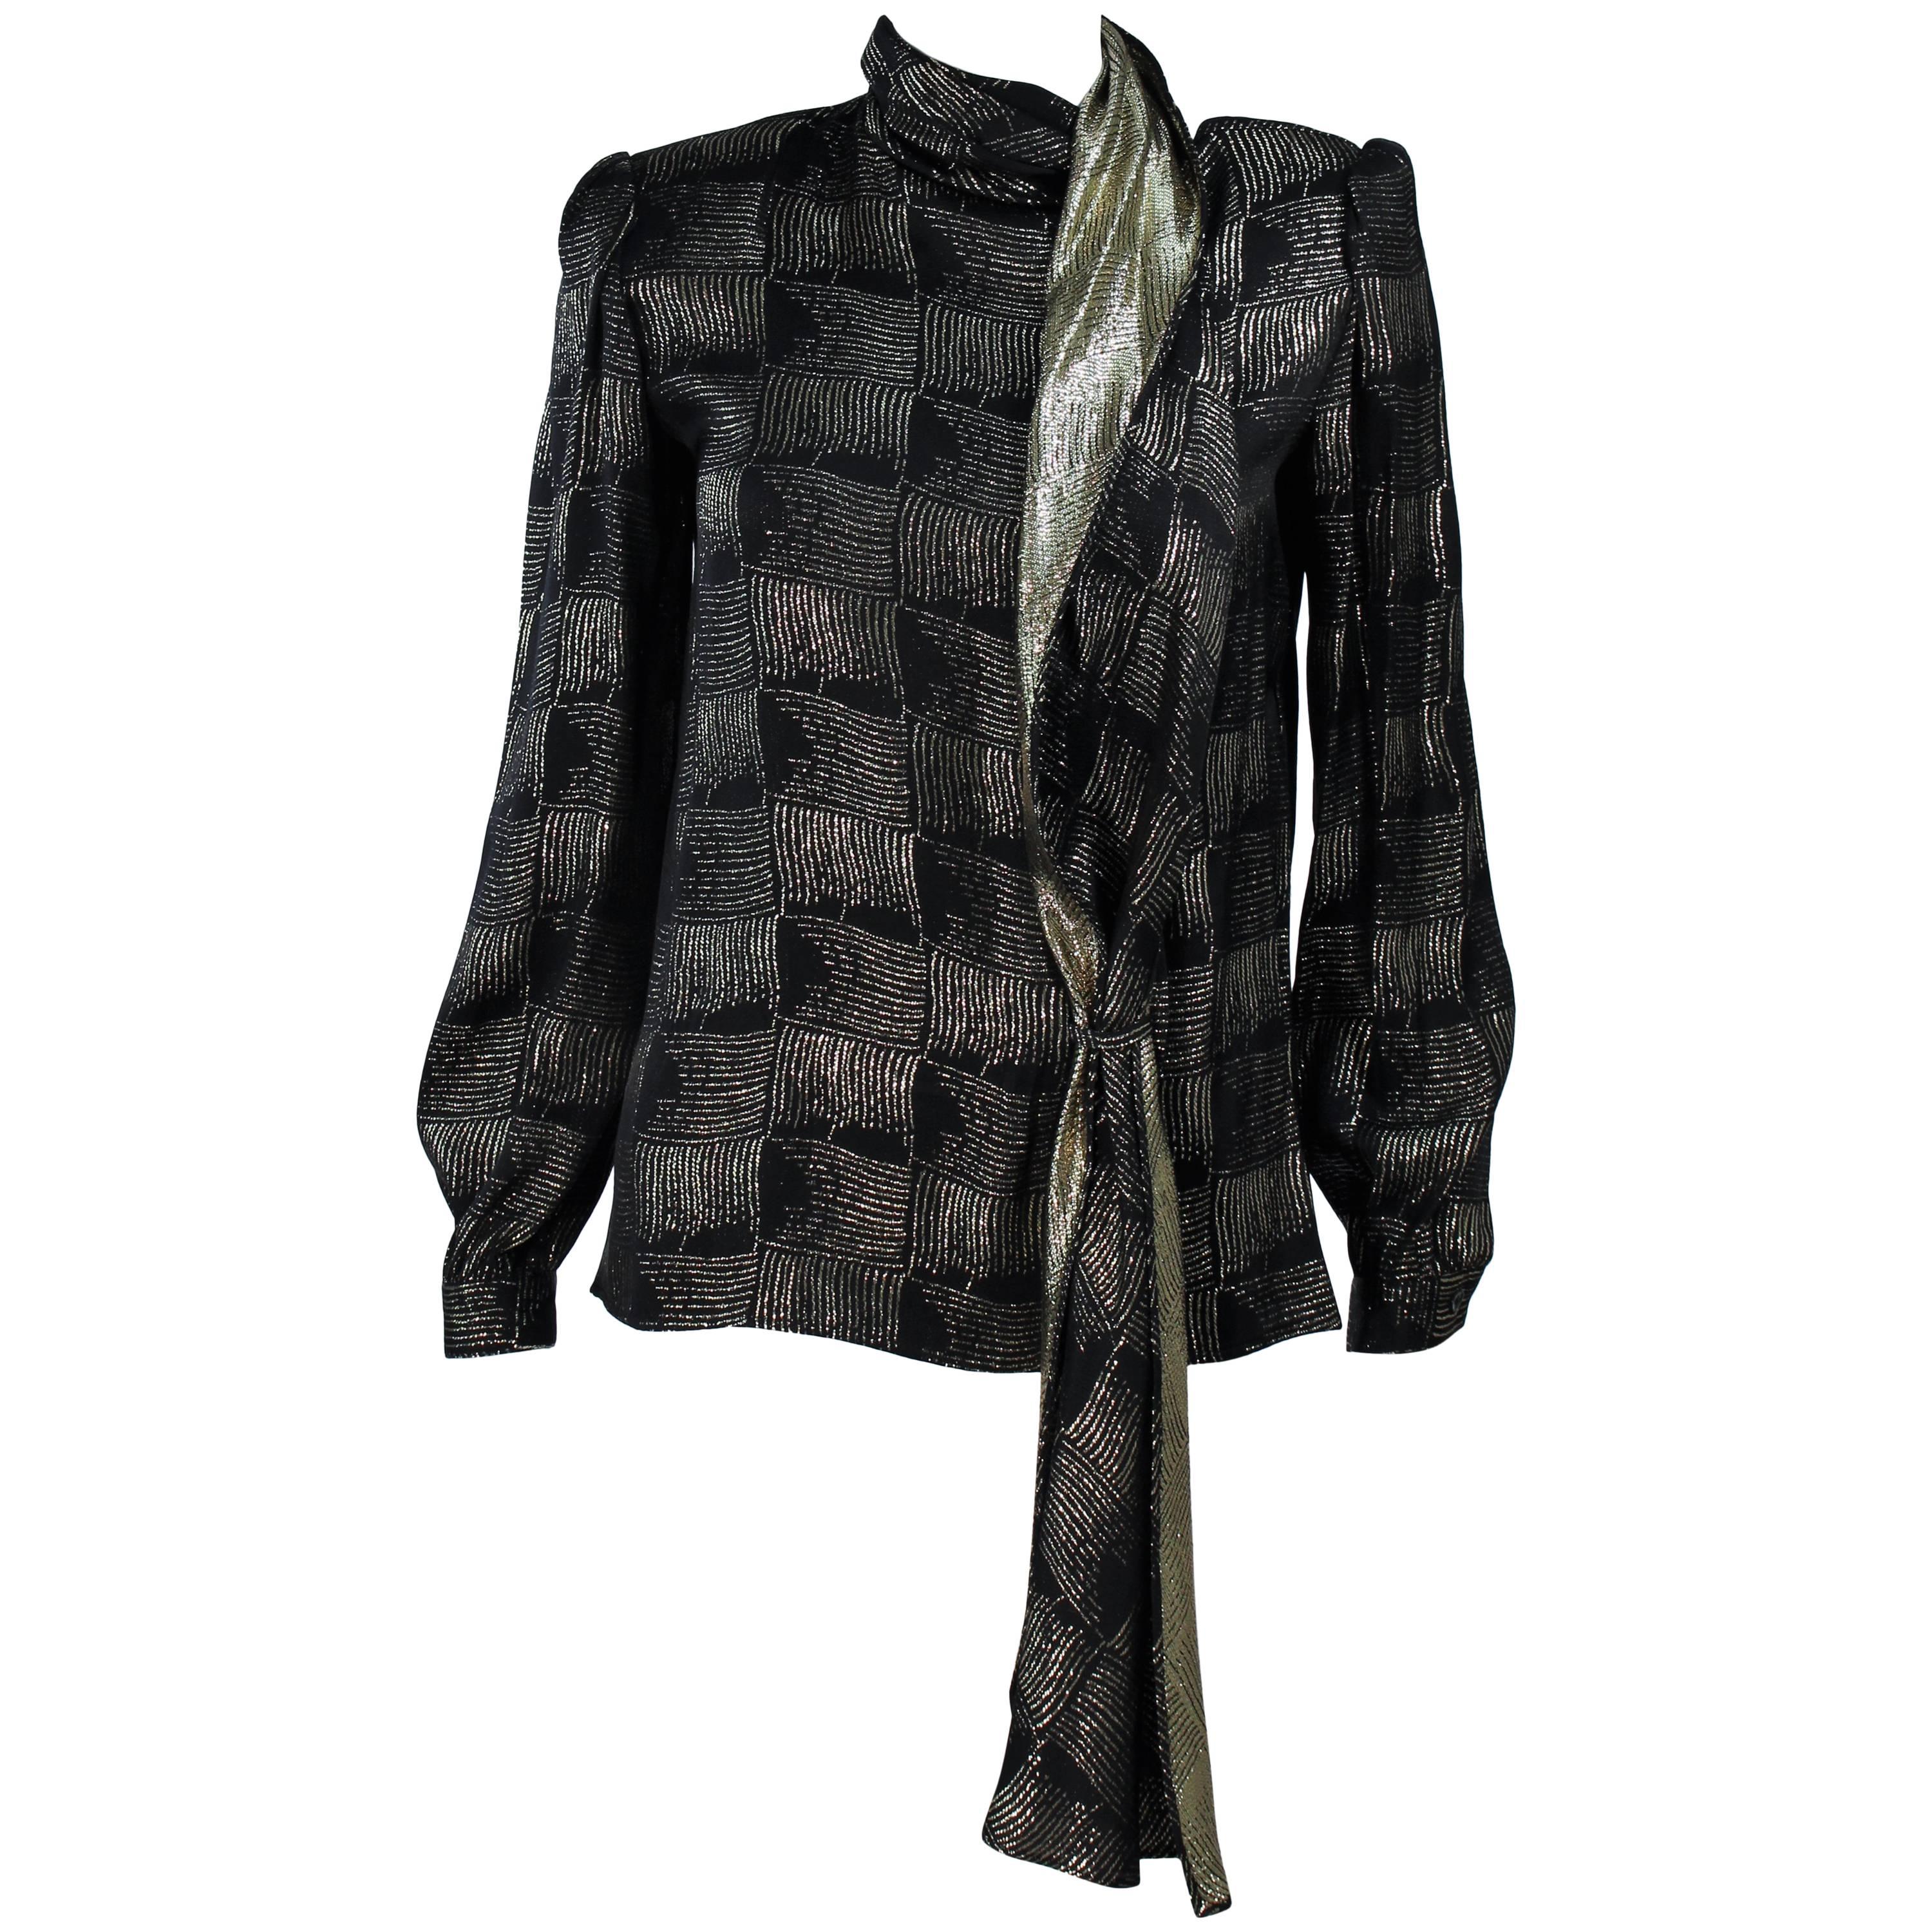 VALENTINO Black and Gold Silk Metallic Blouse with Neck Tie Size 40